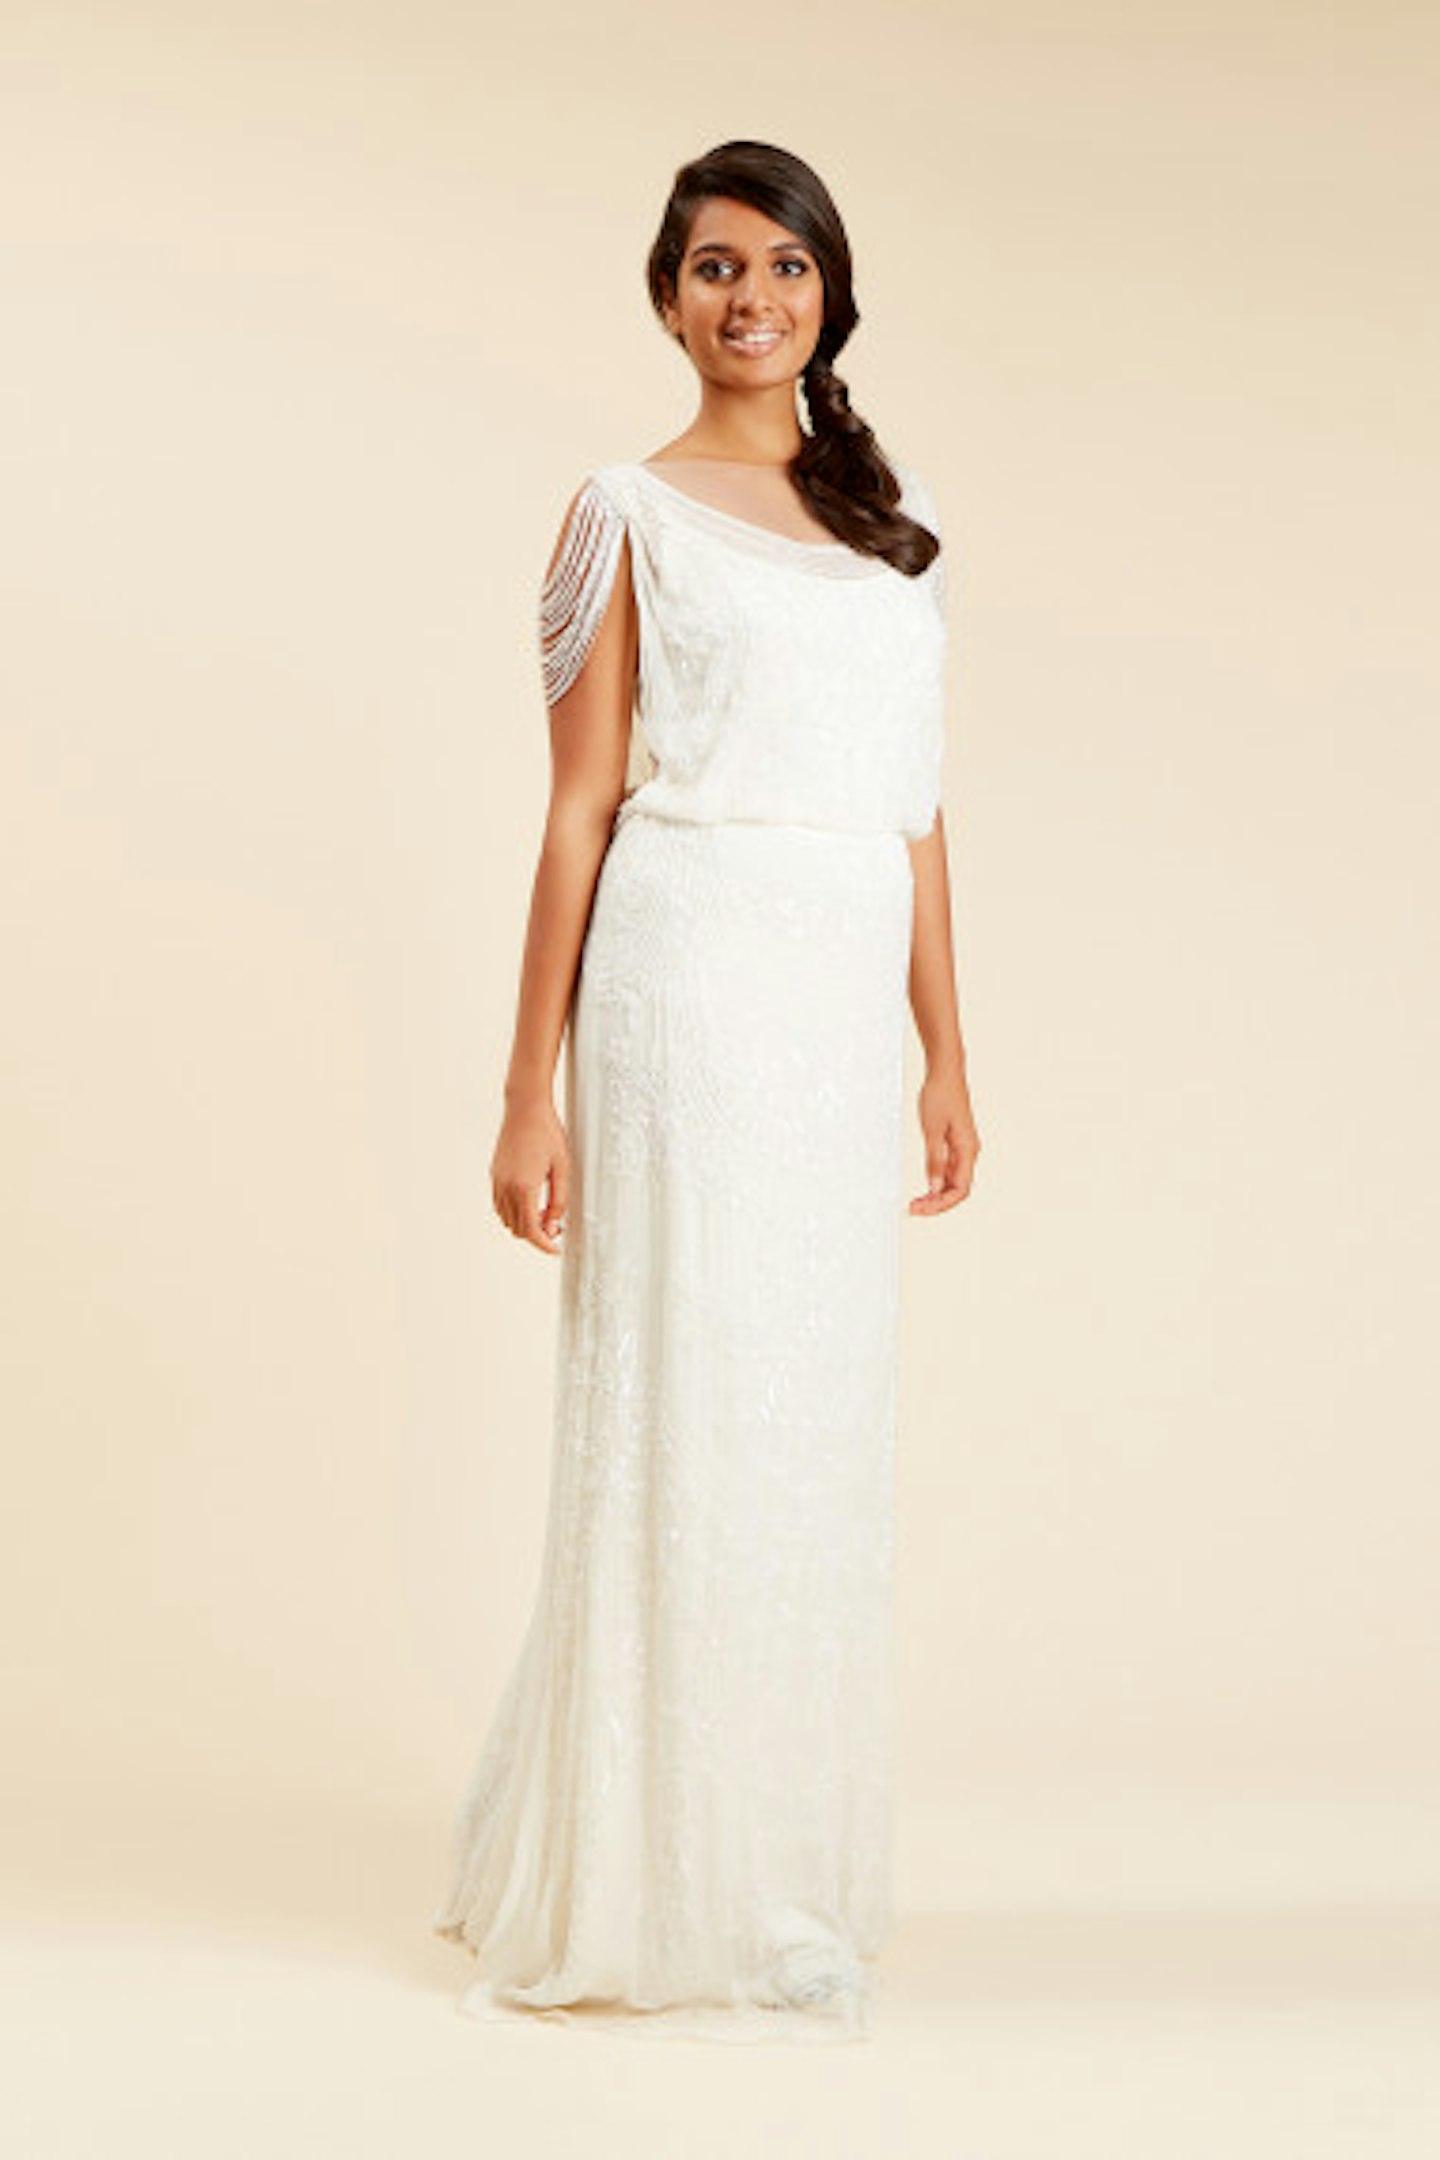 Reem Acra, A-Line Embellished Dress with Cape Sleeves, WAS £7,300, NOW £5,160